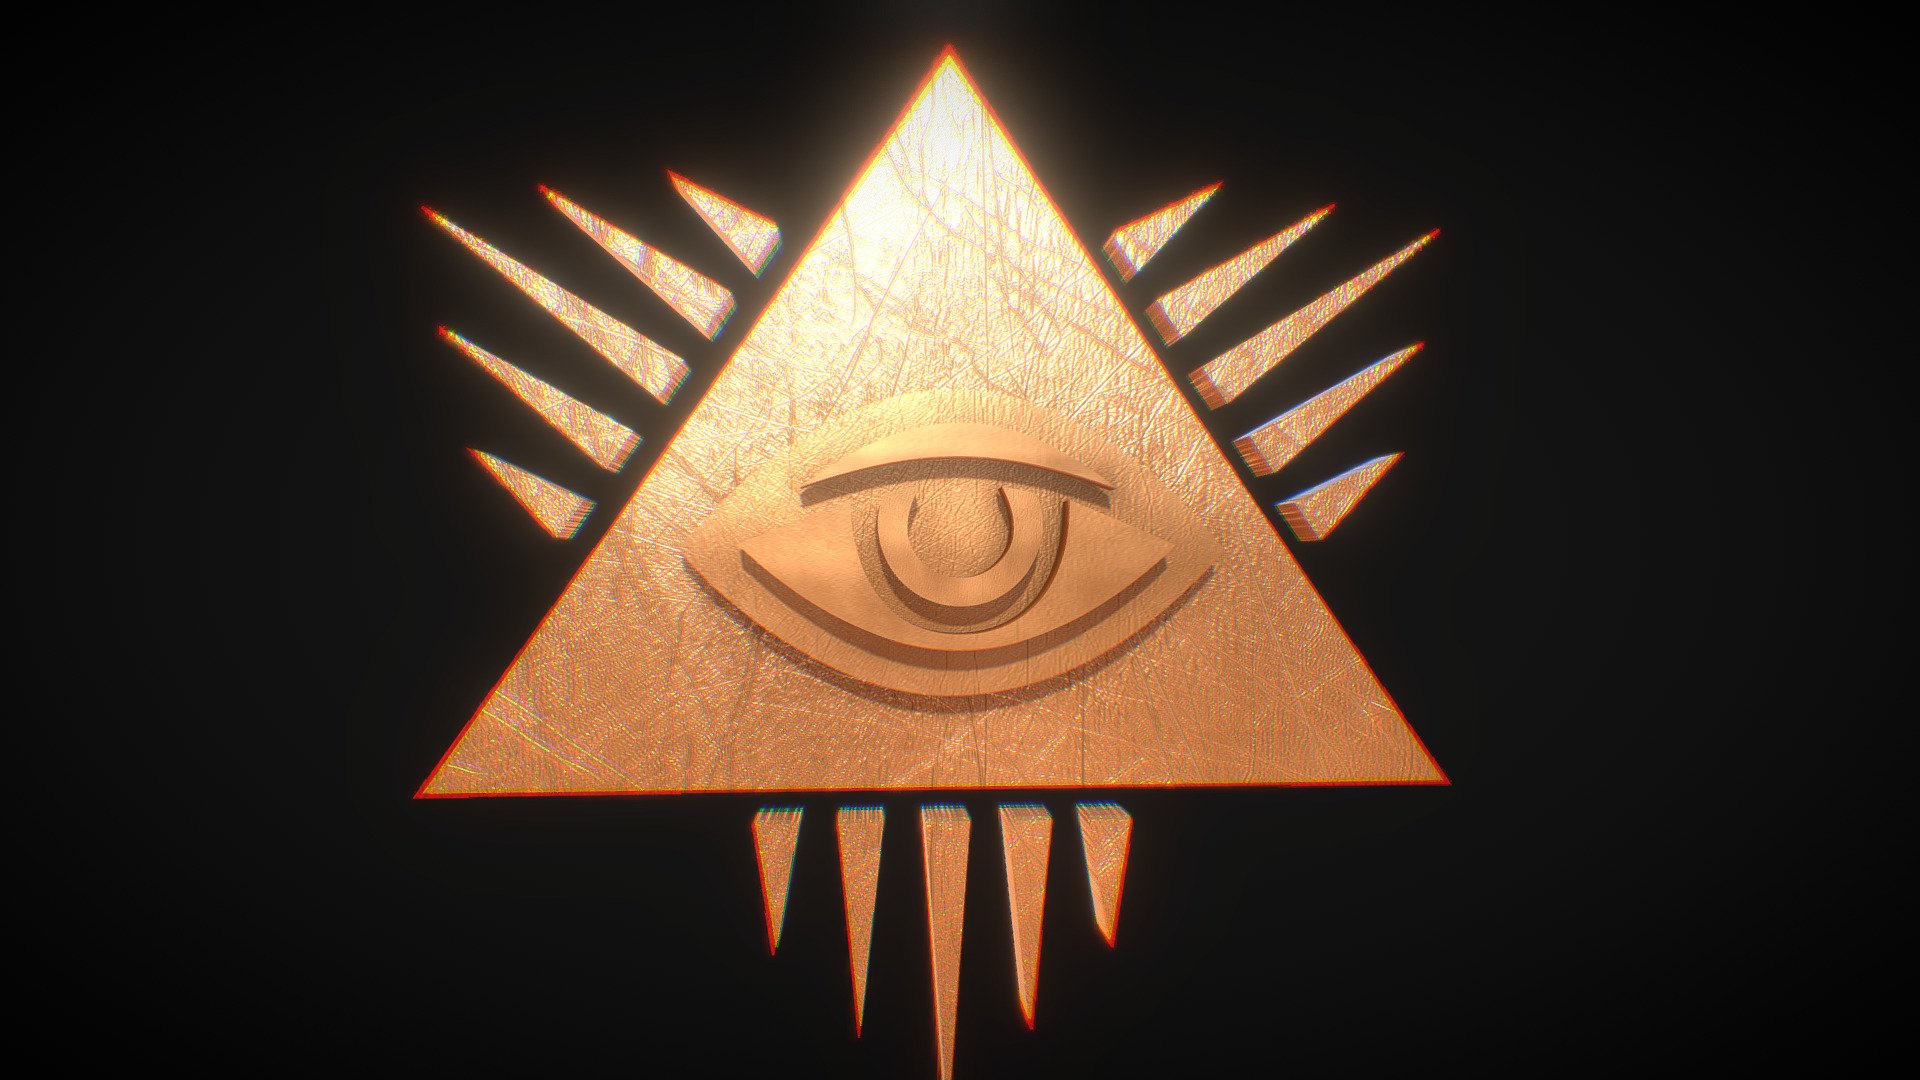 Made in 3D MAX

Digital painting in 3D Coat

PBR Textures in (2048x2048 px)

by Lucid Dreams visuals

www.luciddreamsvisuals.com.ar - Iluminati Eye Pyramid Symbol - Buy Royalty Free 3D model by Lucid Dreams (@lucid_dreams_visuals) 3d model